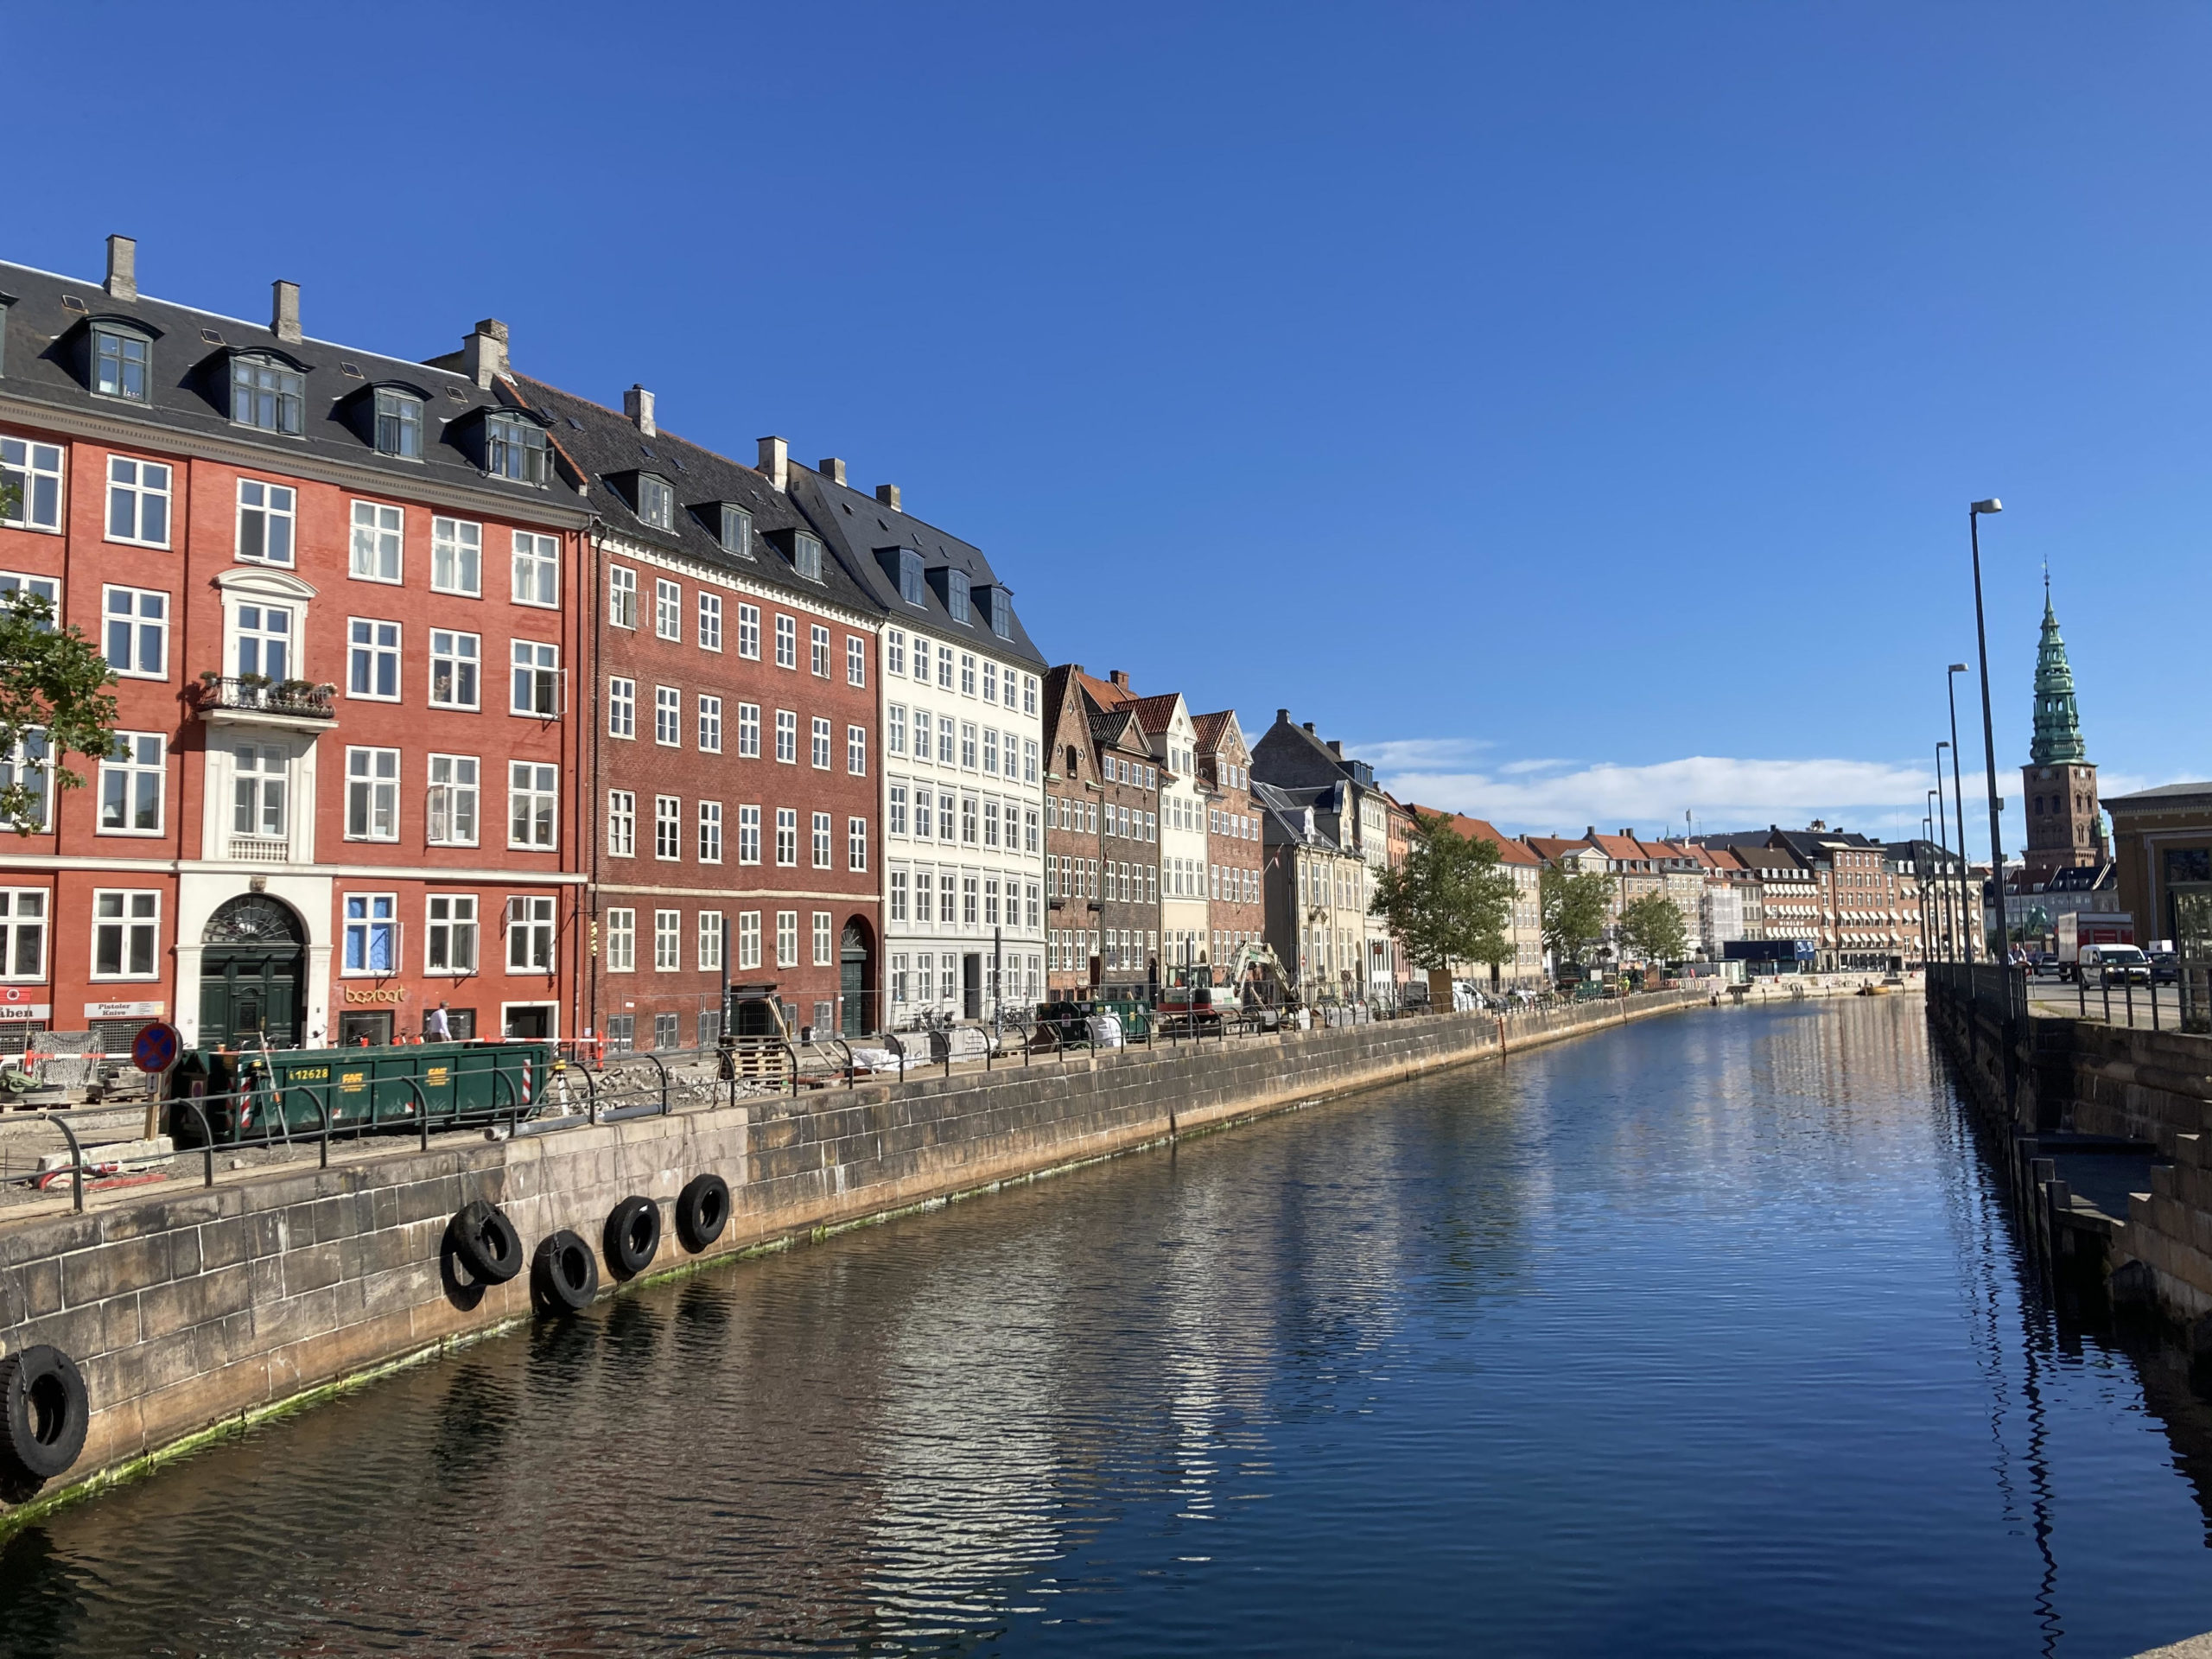 Think about cities in Denmark | Findings from studying urban design in ...